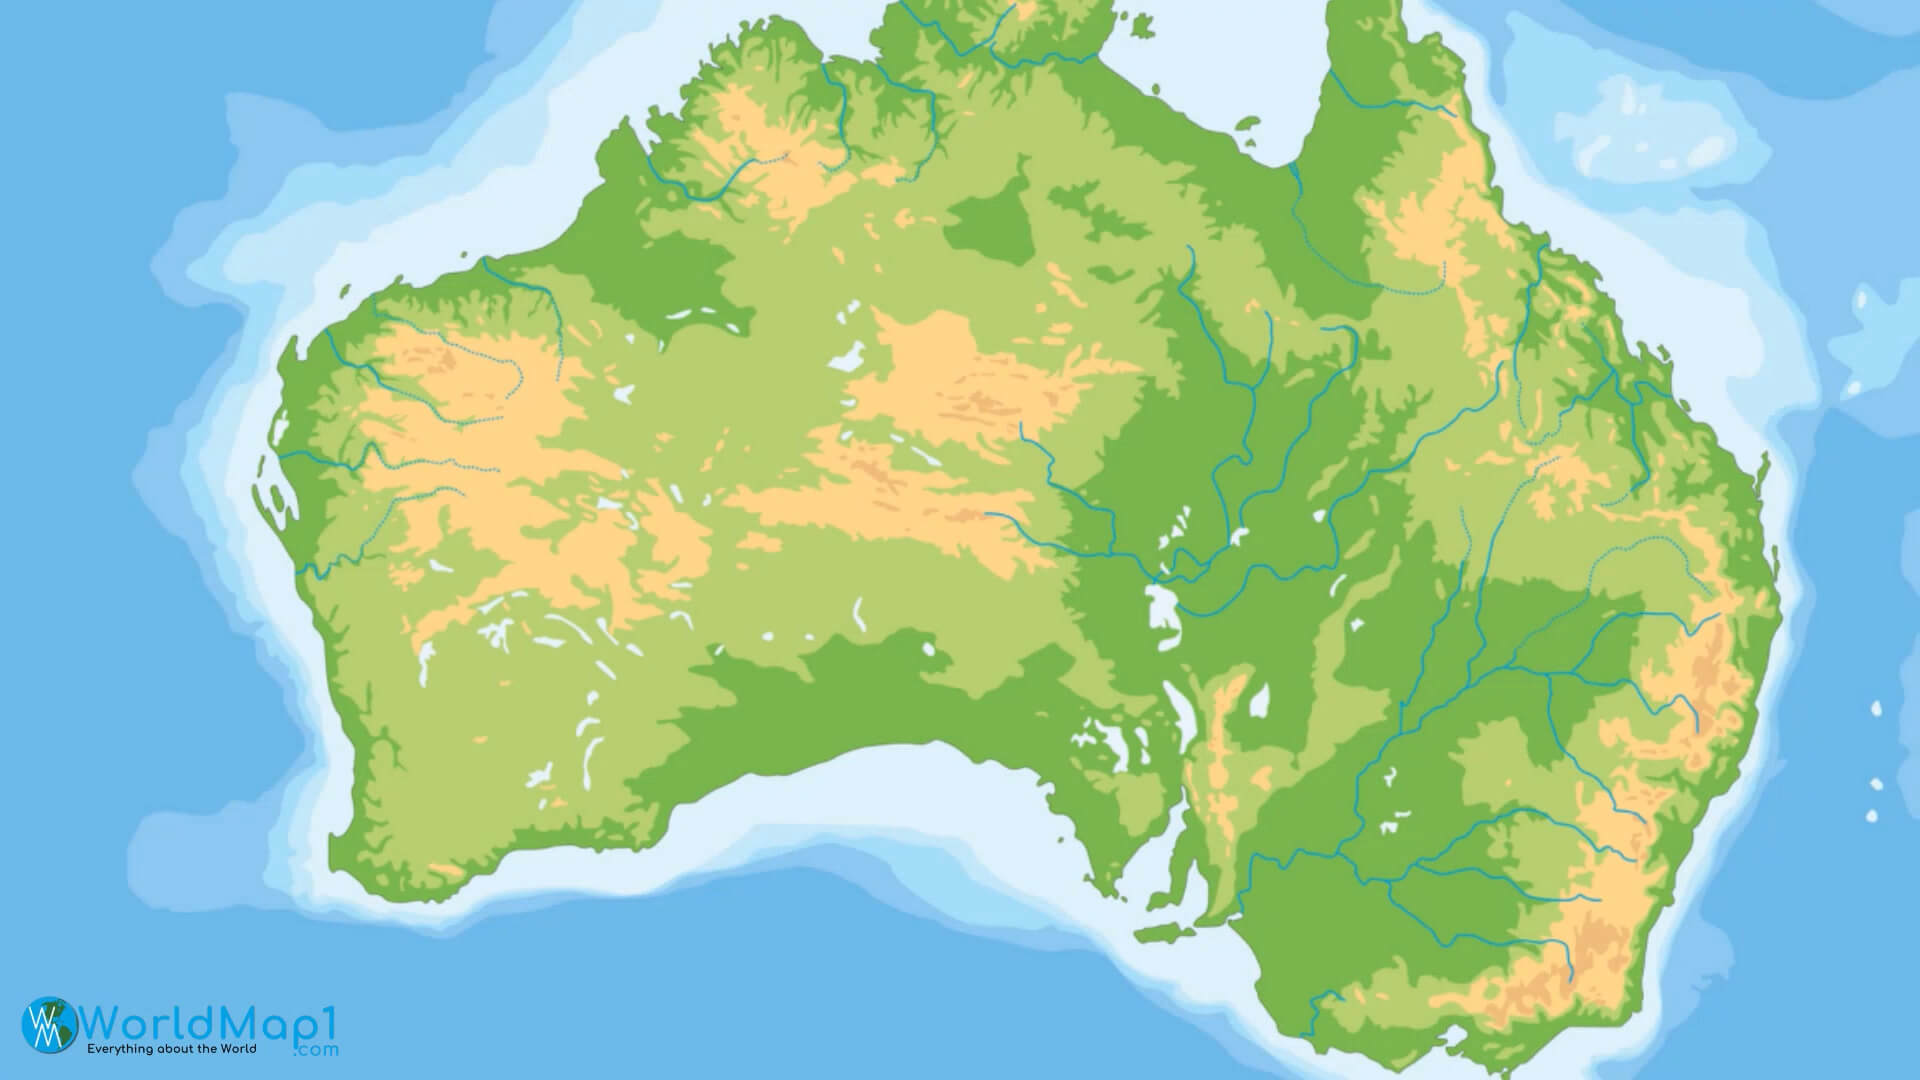 Physical Map of Australia